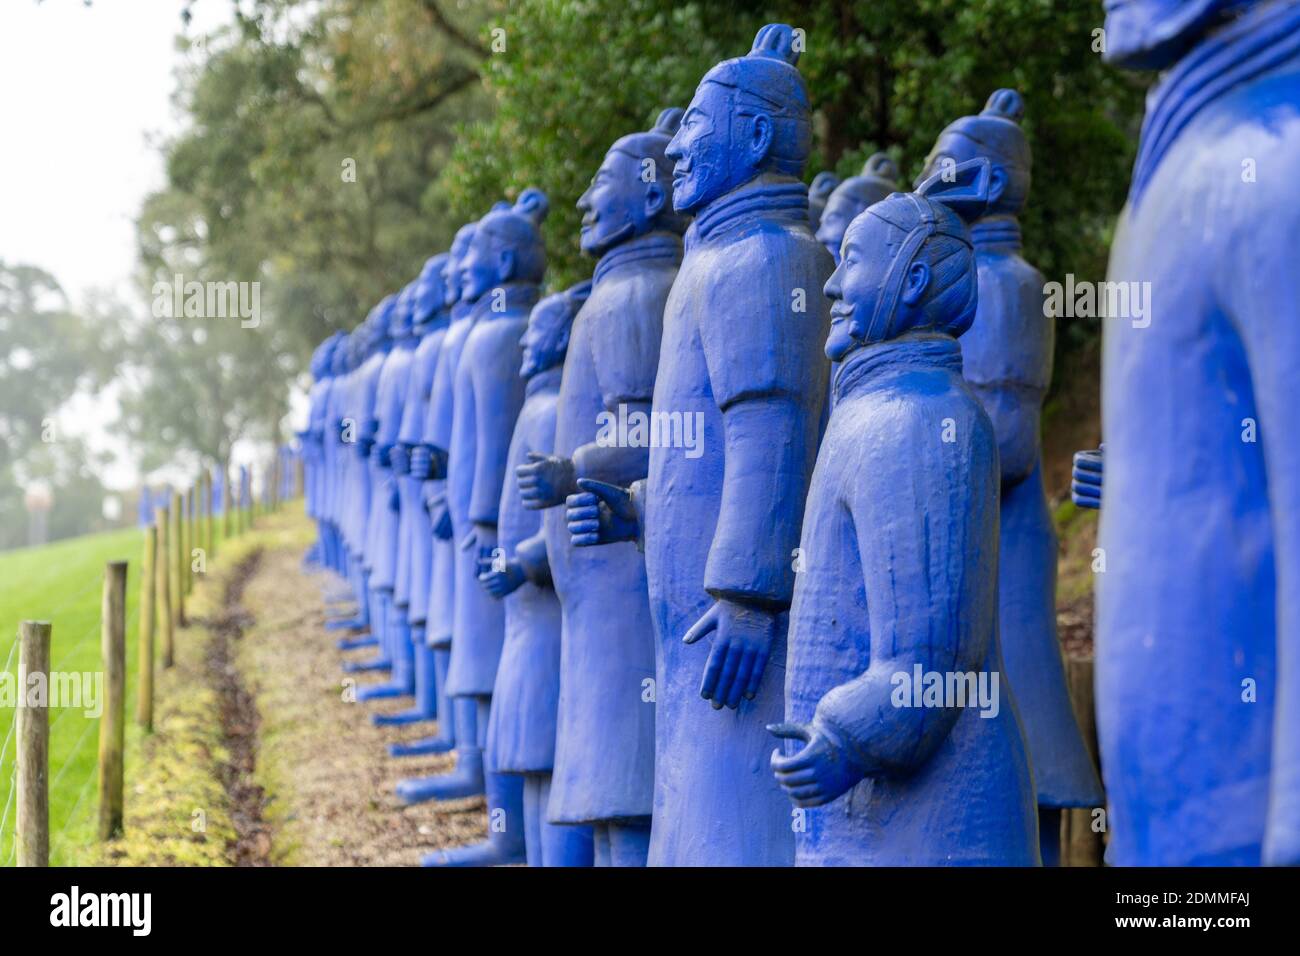 Carvalhal Bombarral, Portugal - 13 December 2020: blue Chinese terracotta warriors in the Buddha Eden Garden in Portugal Stockfoto